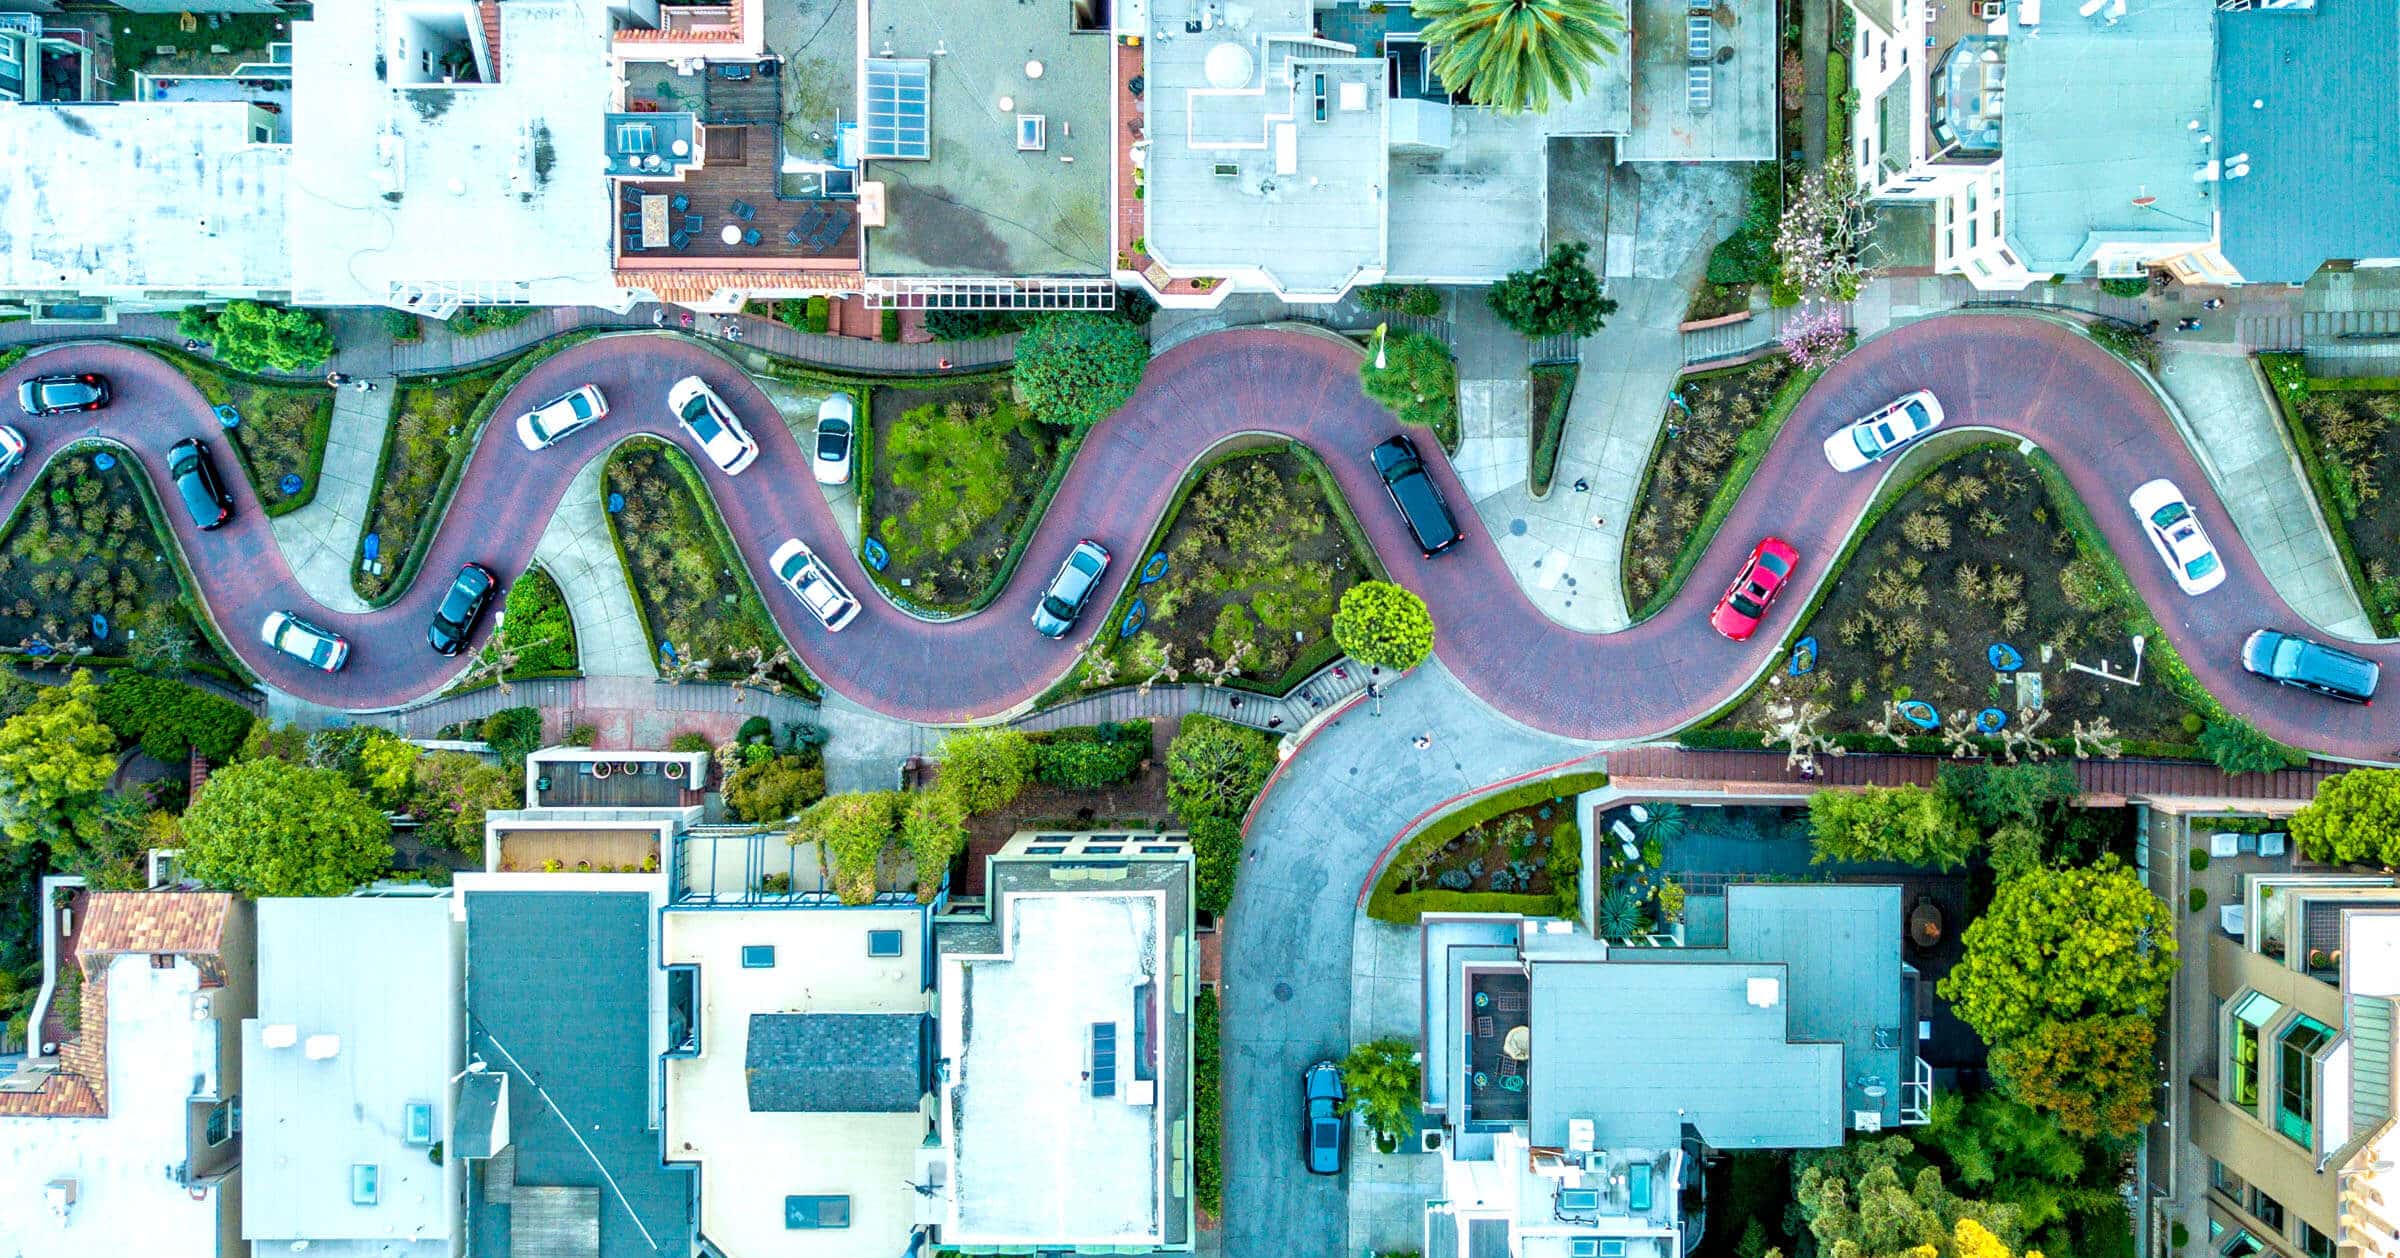 An overhead shot of cars slowly zigzagging down Lombard Street in San Francisco